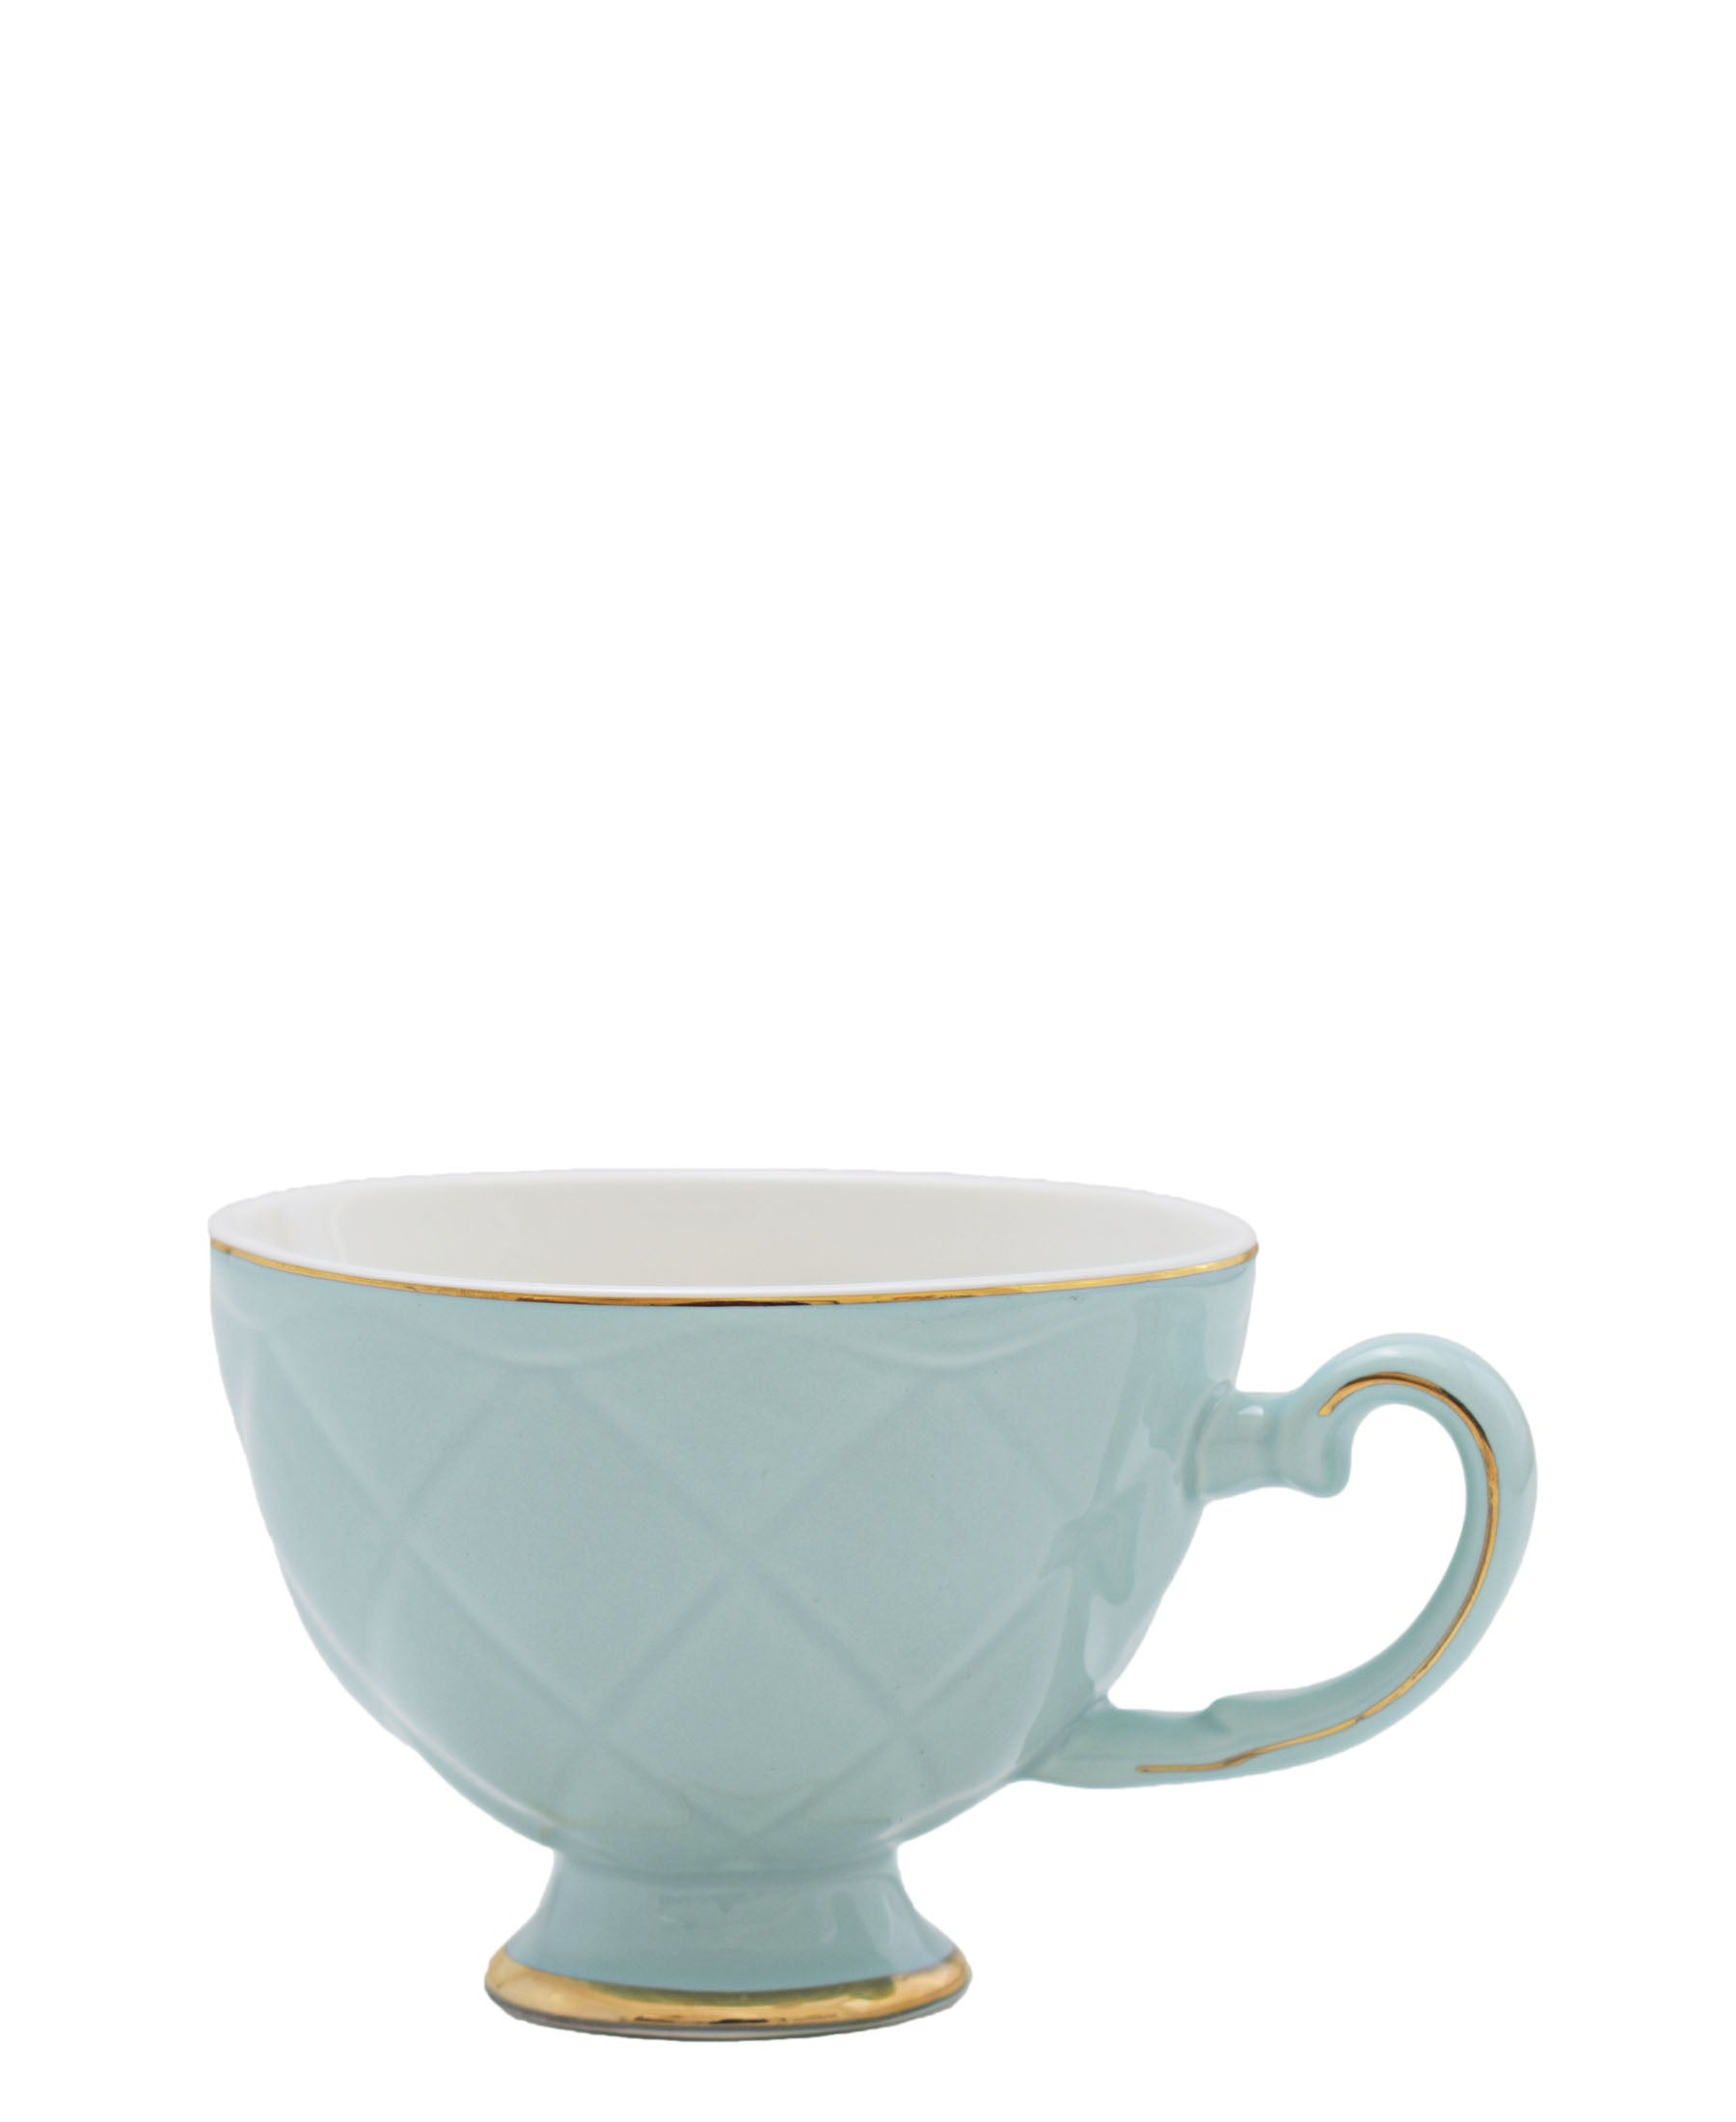 Kitchen Life Cup & Saucer 3 Piece - Blue With Gold Rim